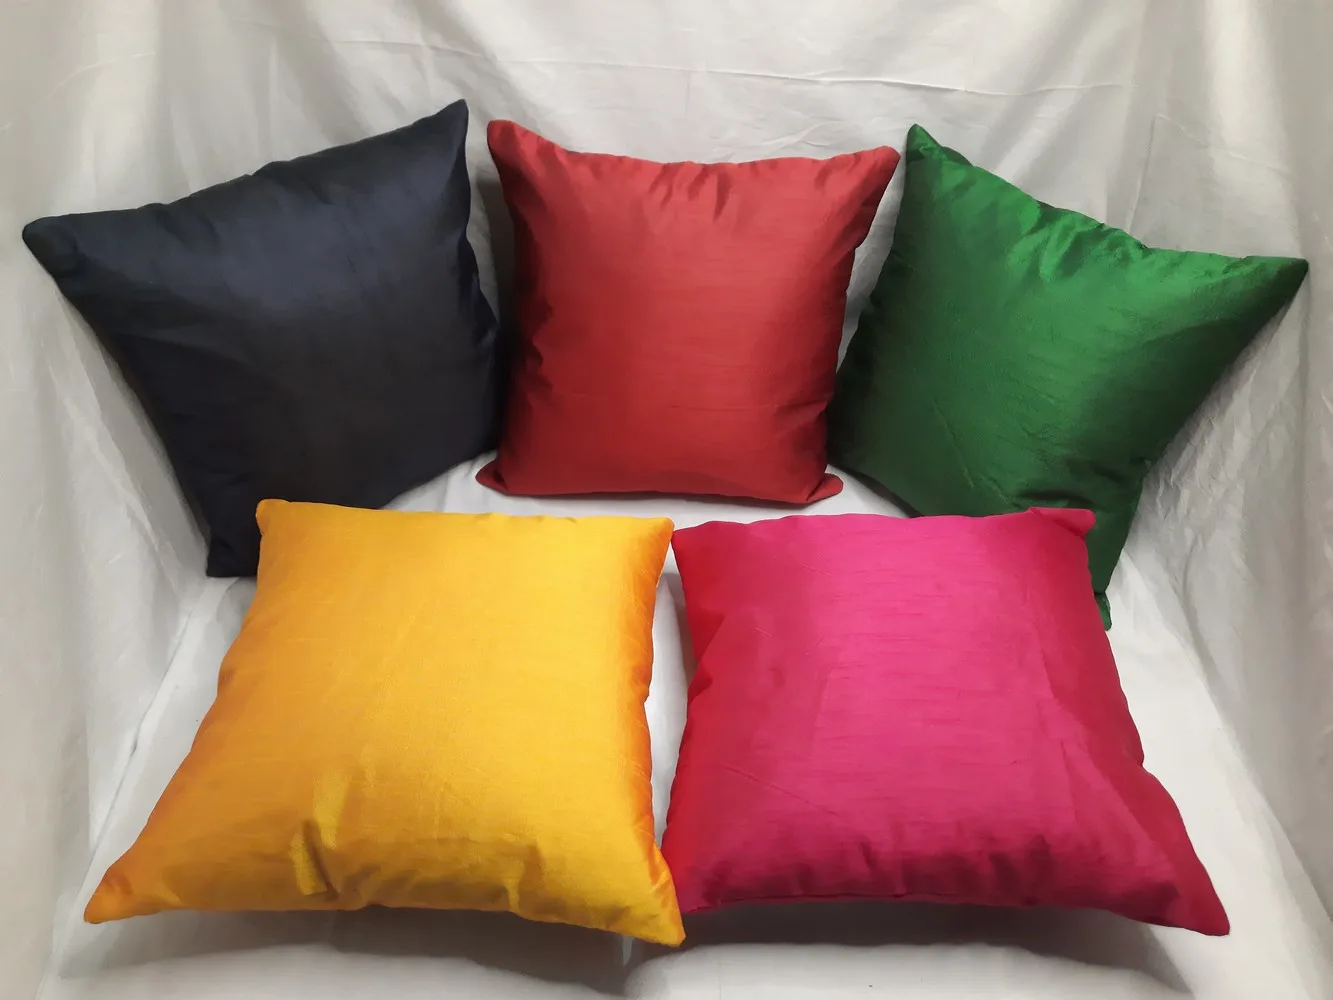 Dupion Multi Color plain Cushion Cover, 16x16 Inches, Assorted, Set of 5